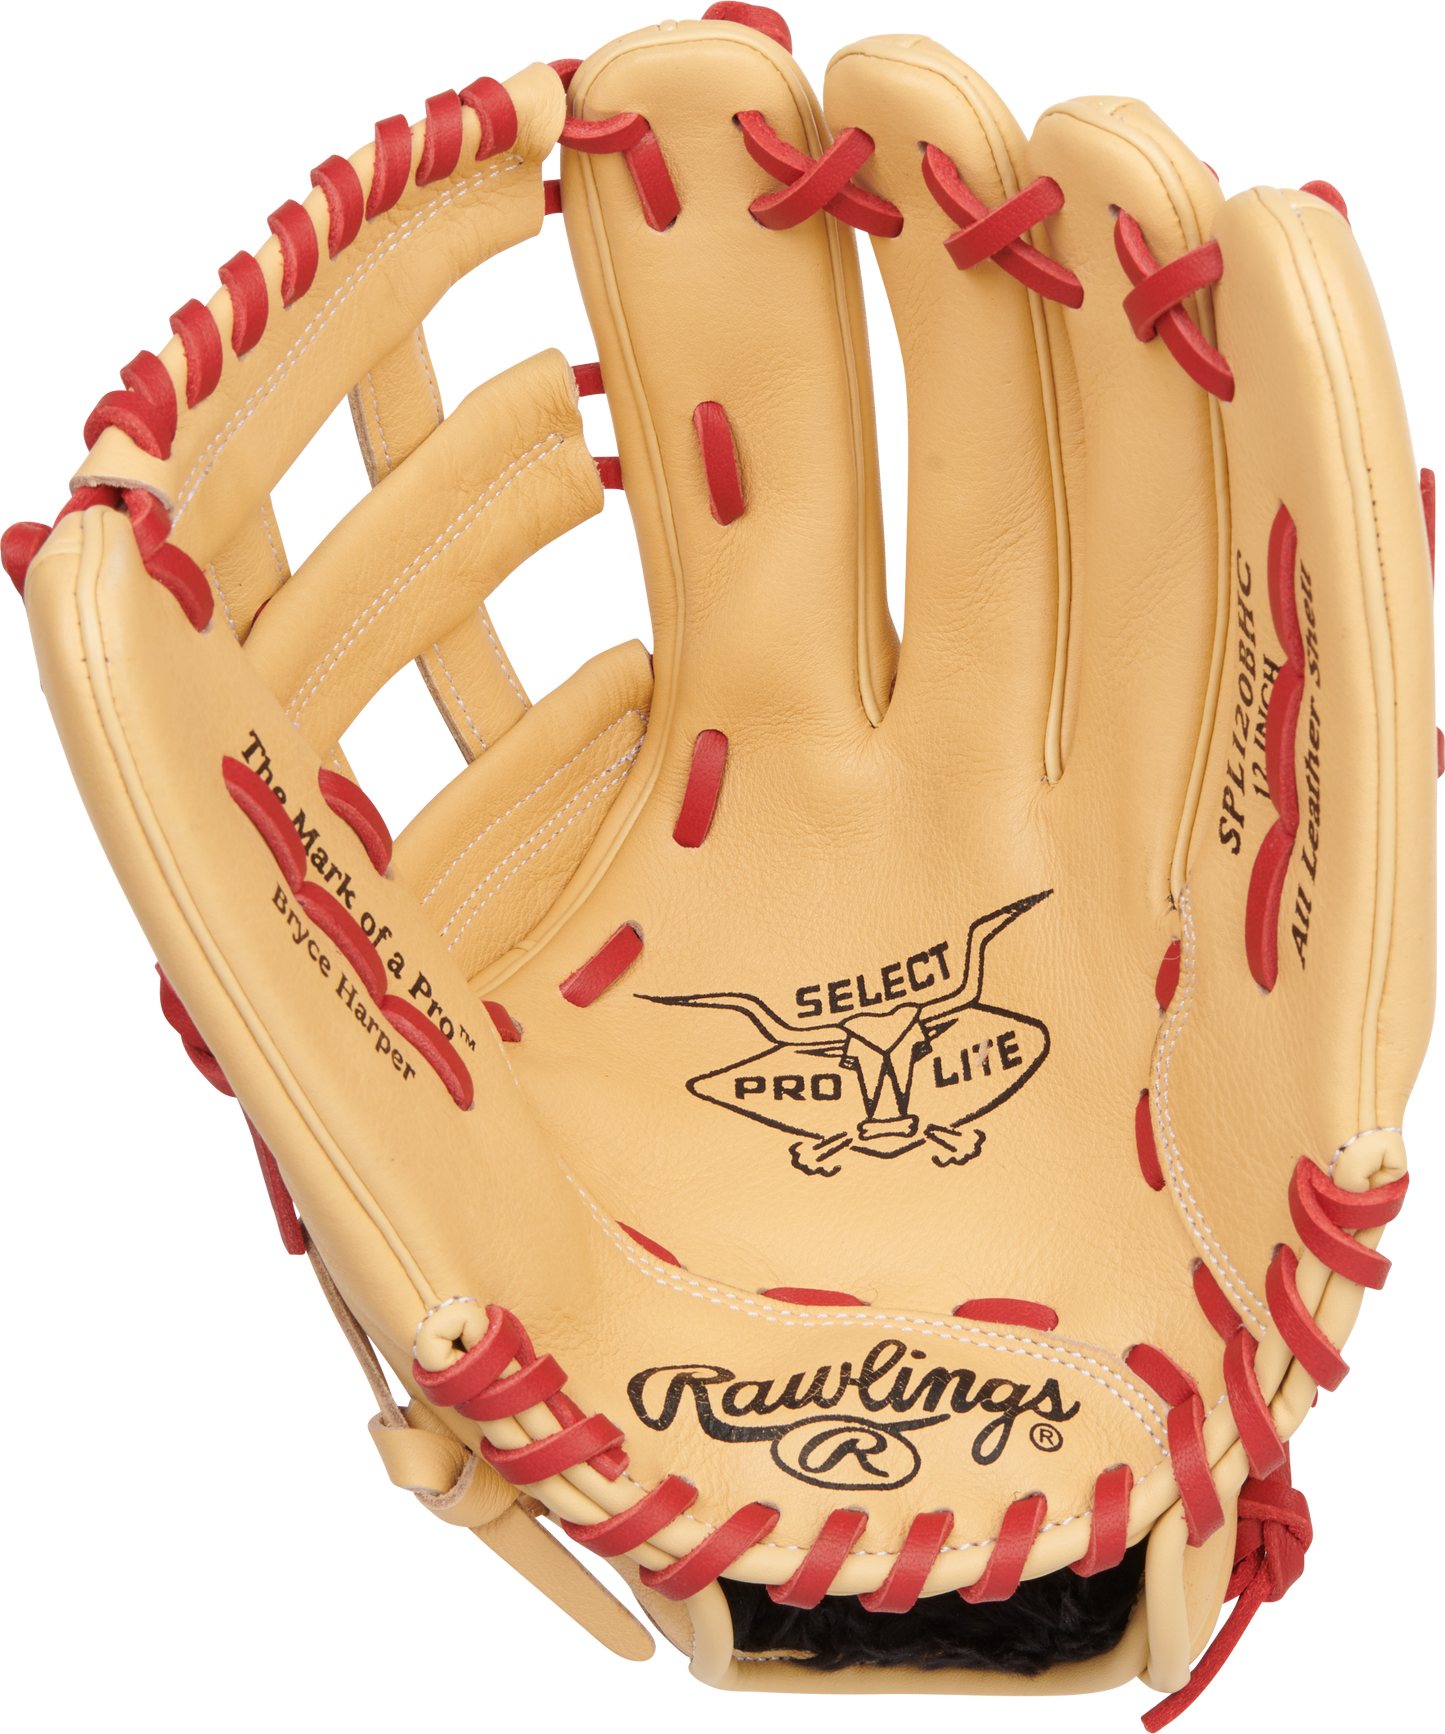 RAWLINGS BRYCE HARPER 12 INCH YOUTH SELECT PRO LITE GLOVE